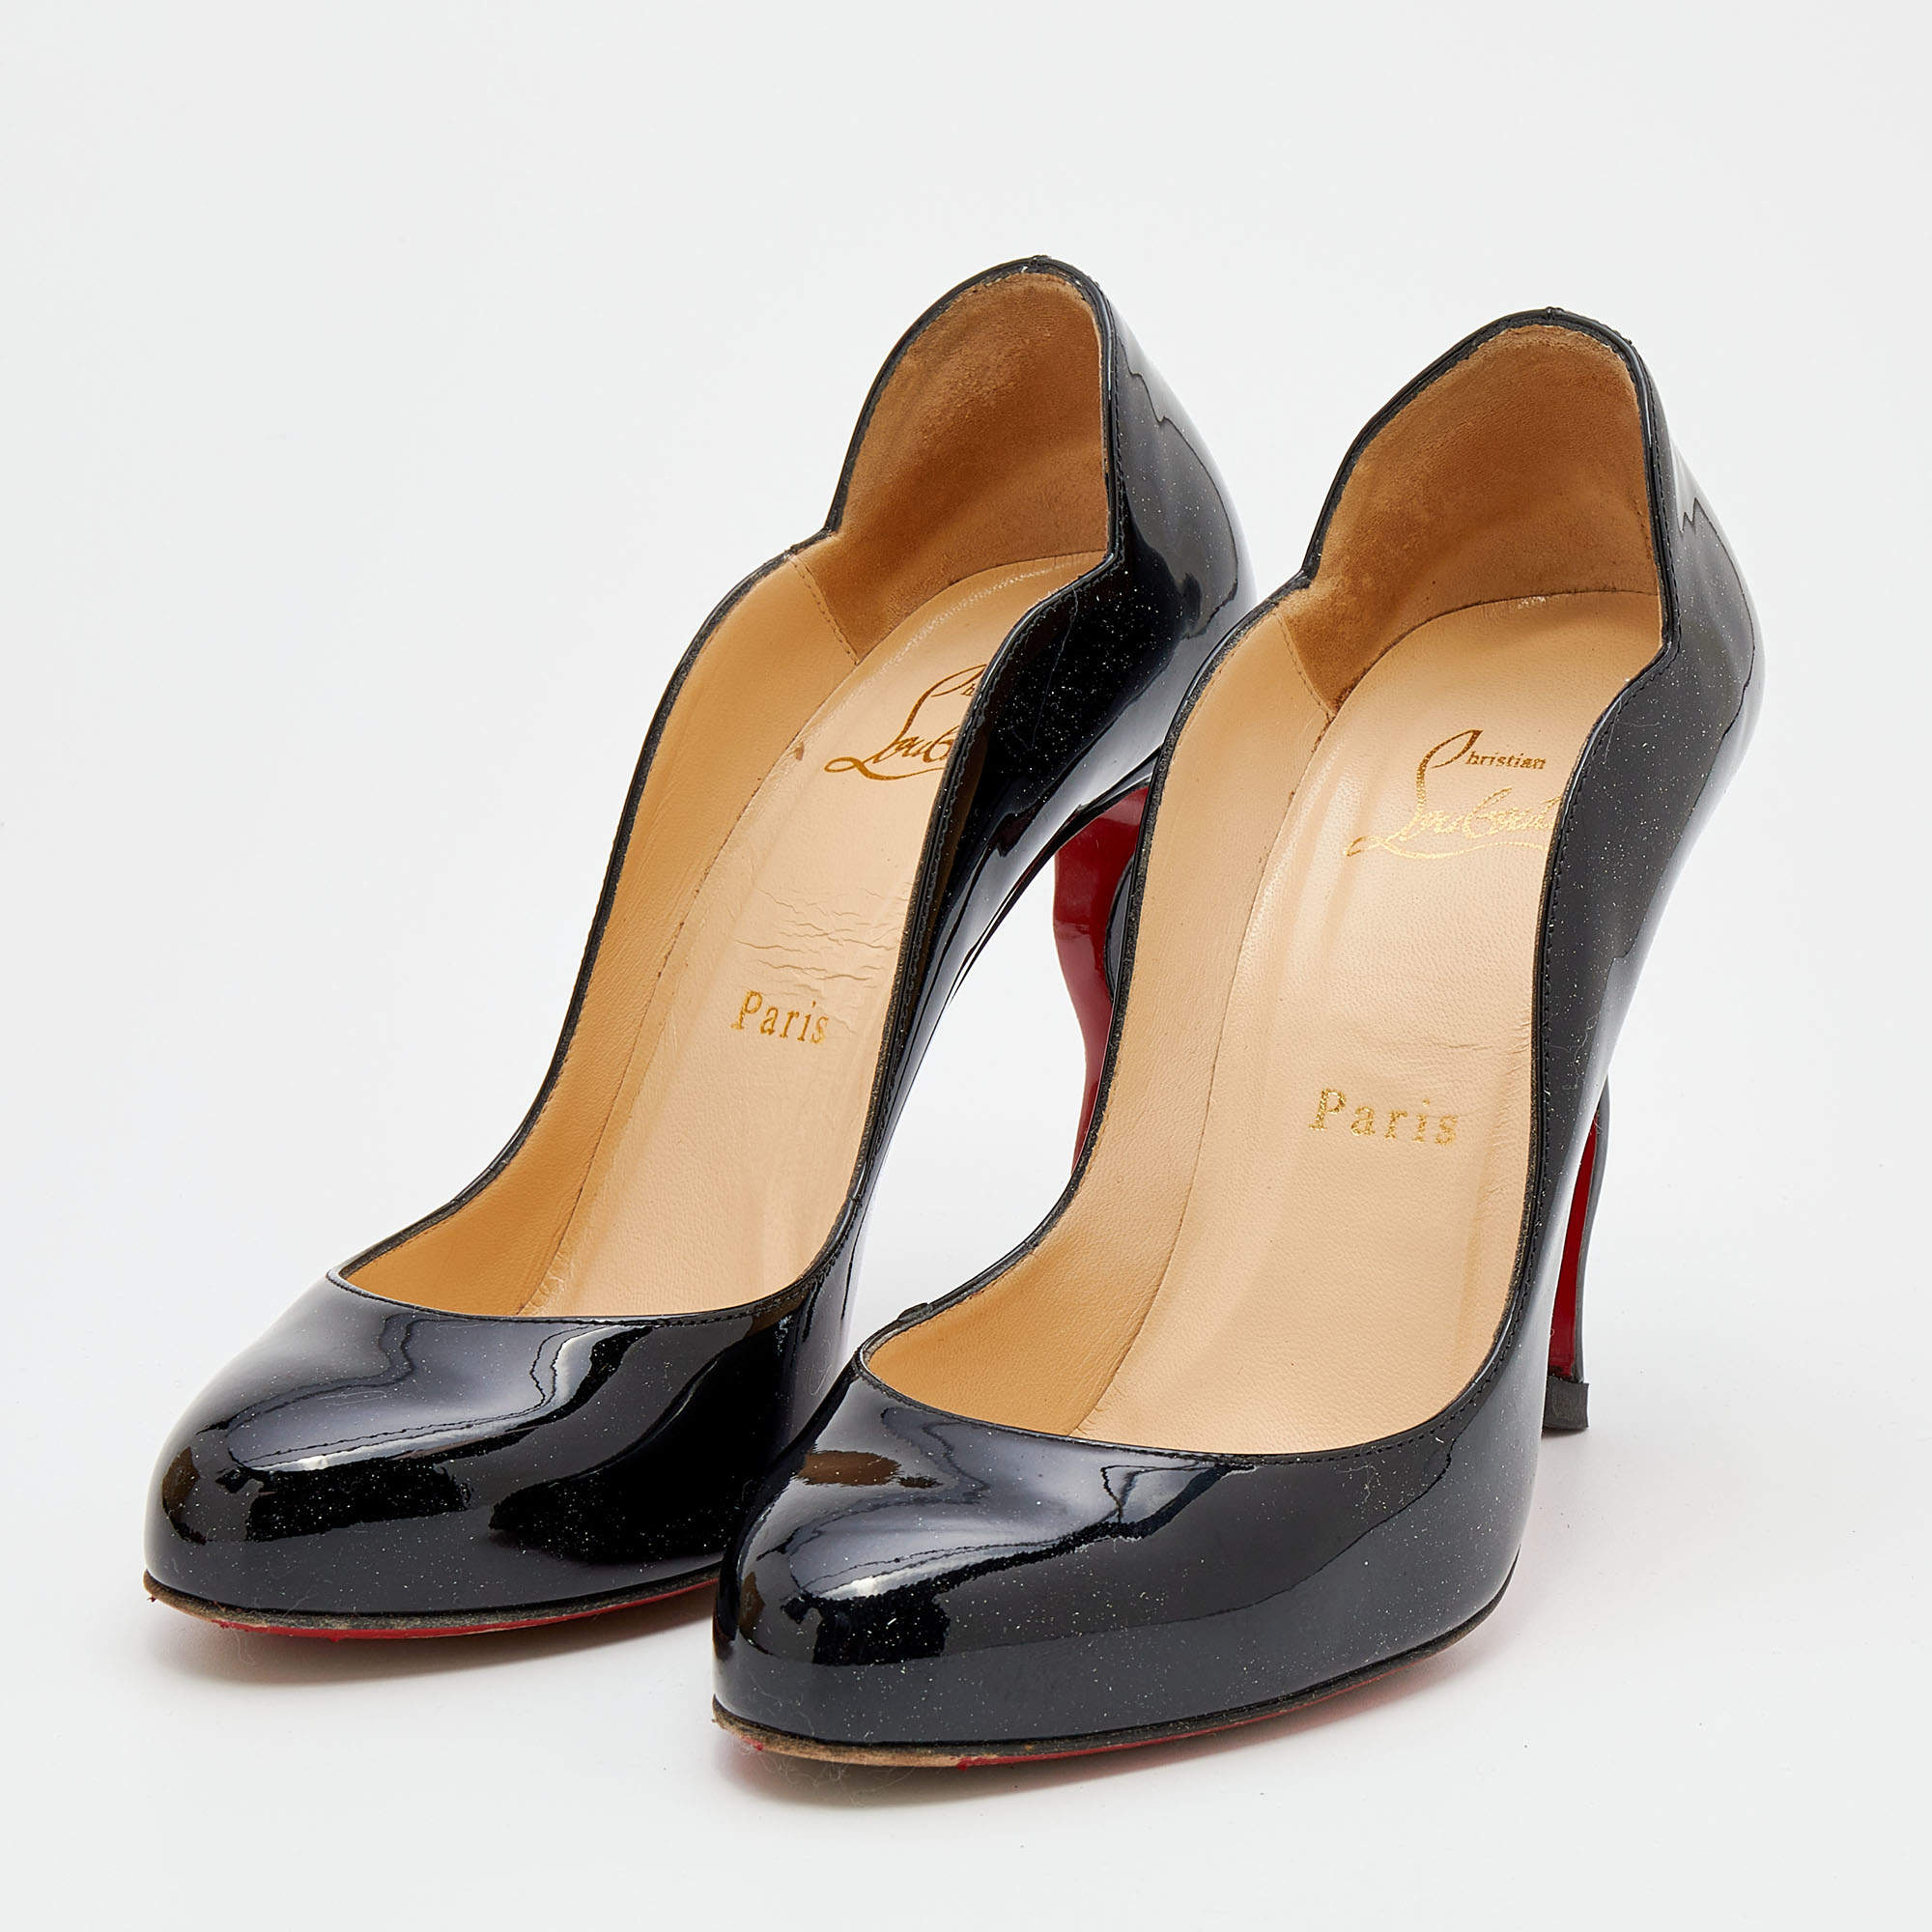 Christian Louboutin Black Patent Leather Wavy Dolly Pumps Size 36.5